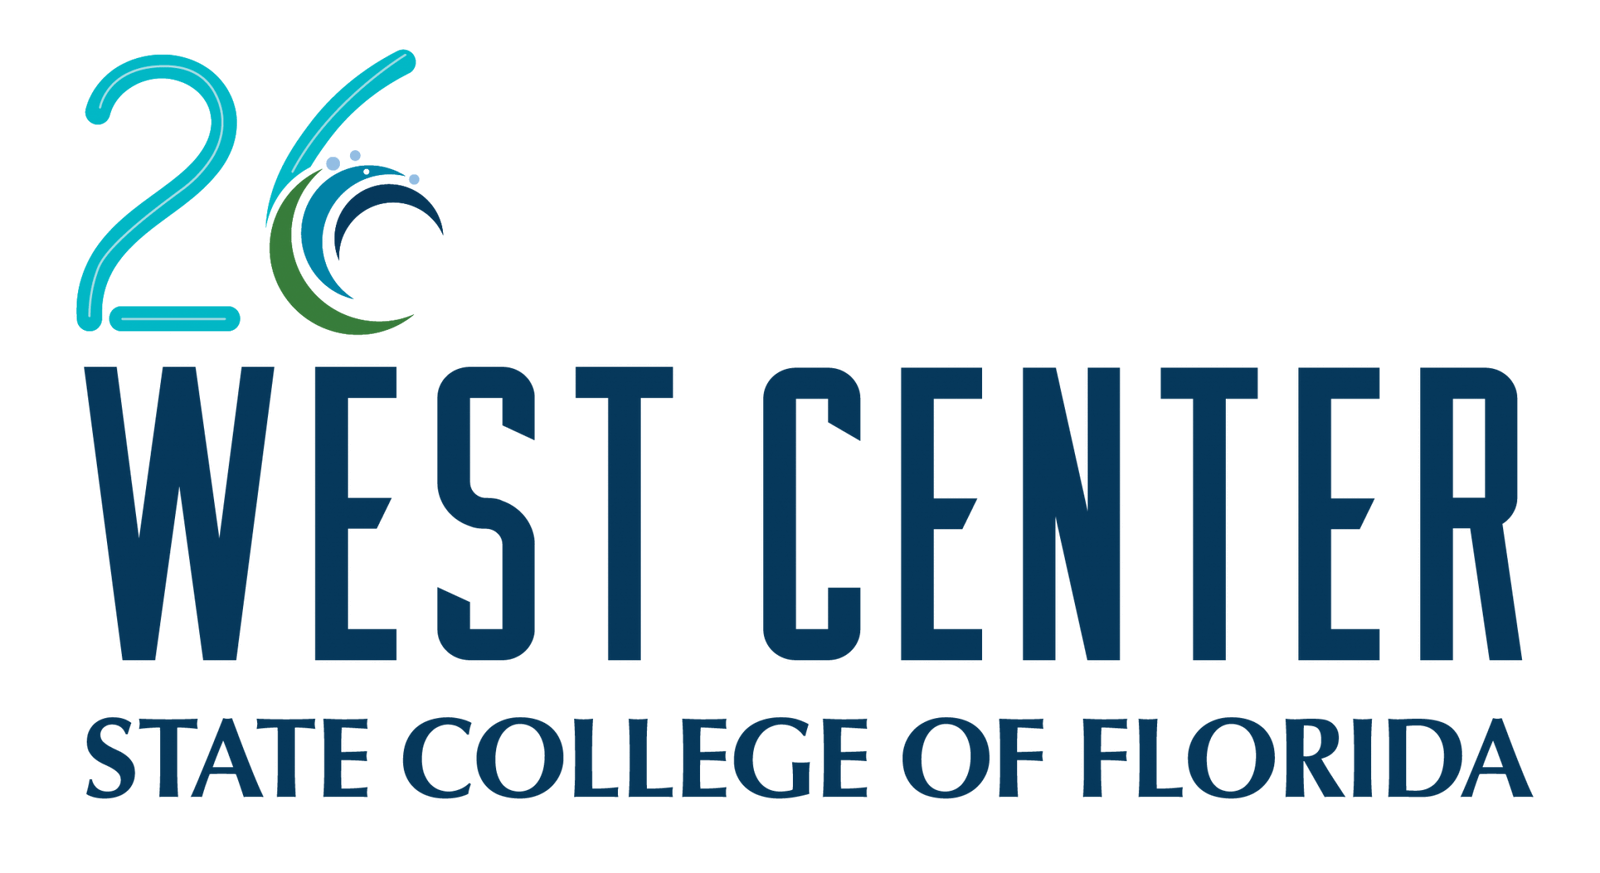 26 West Center State College of Florida logo